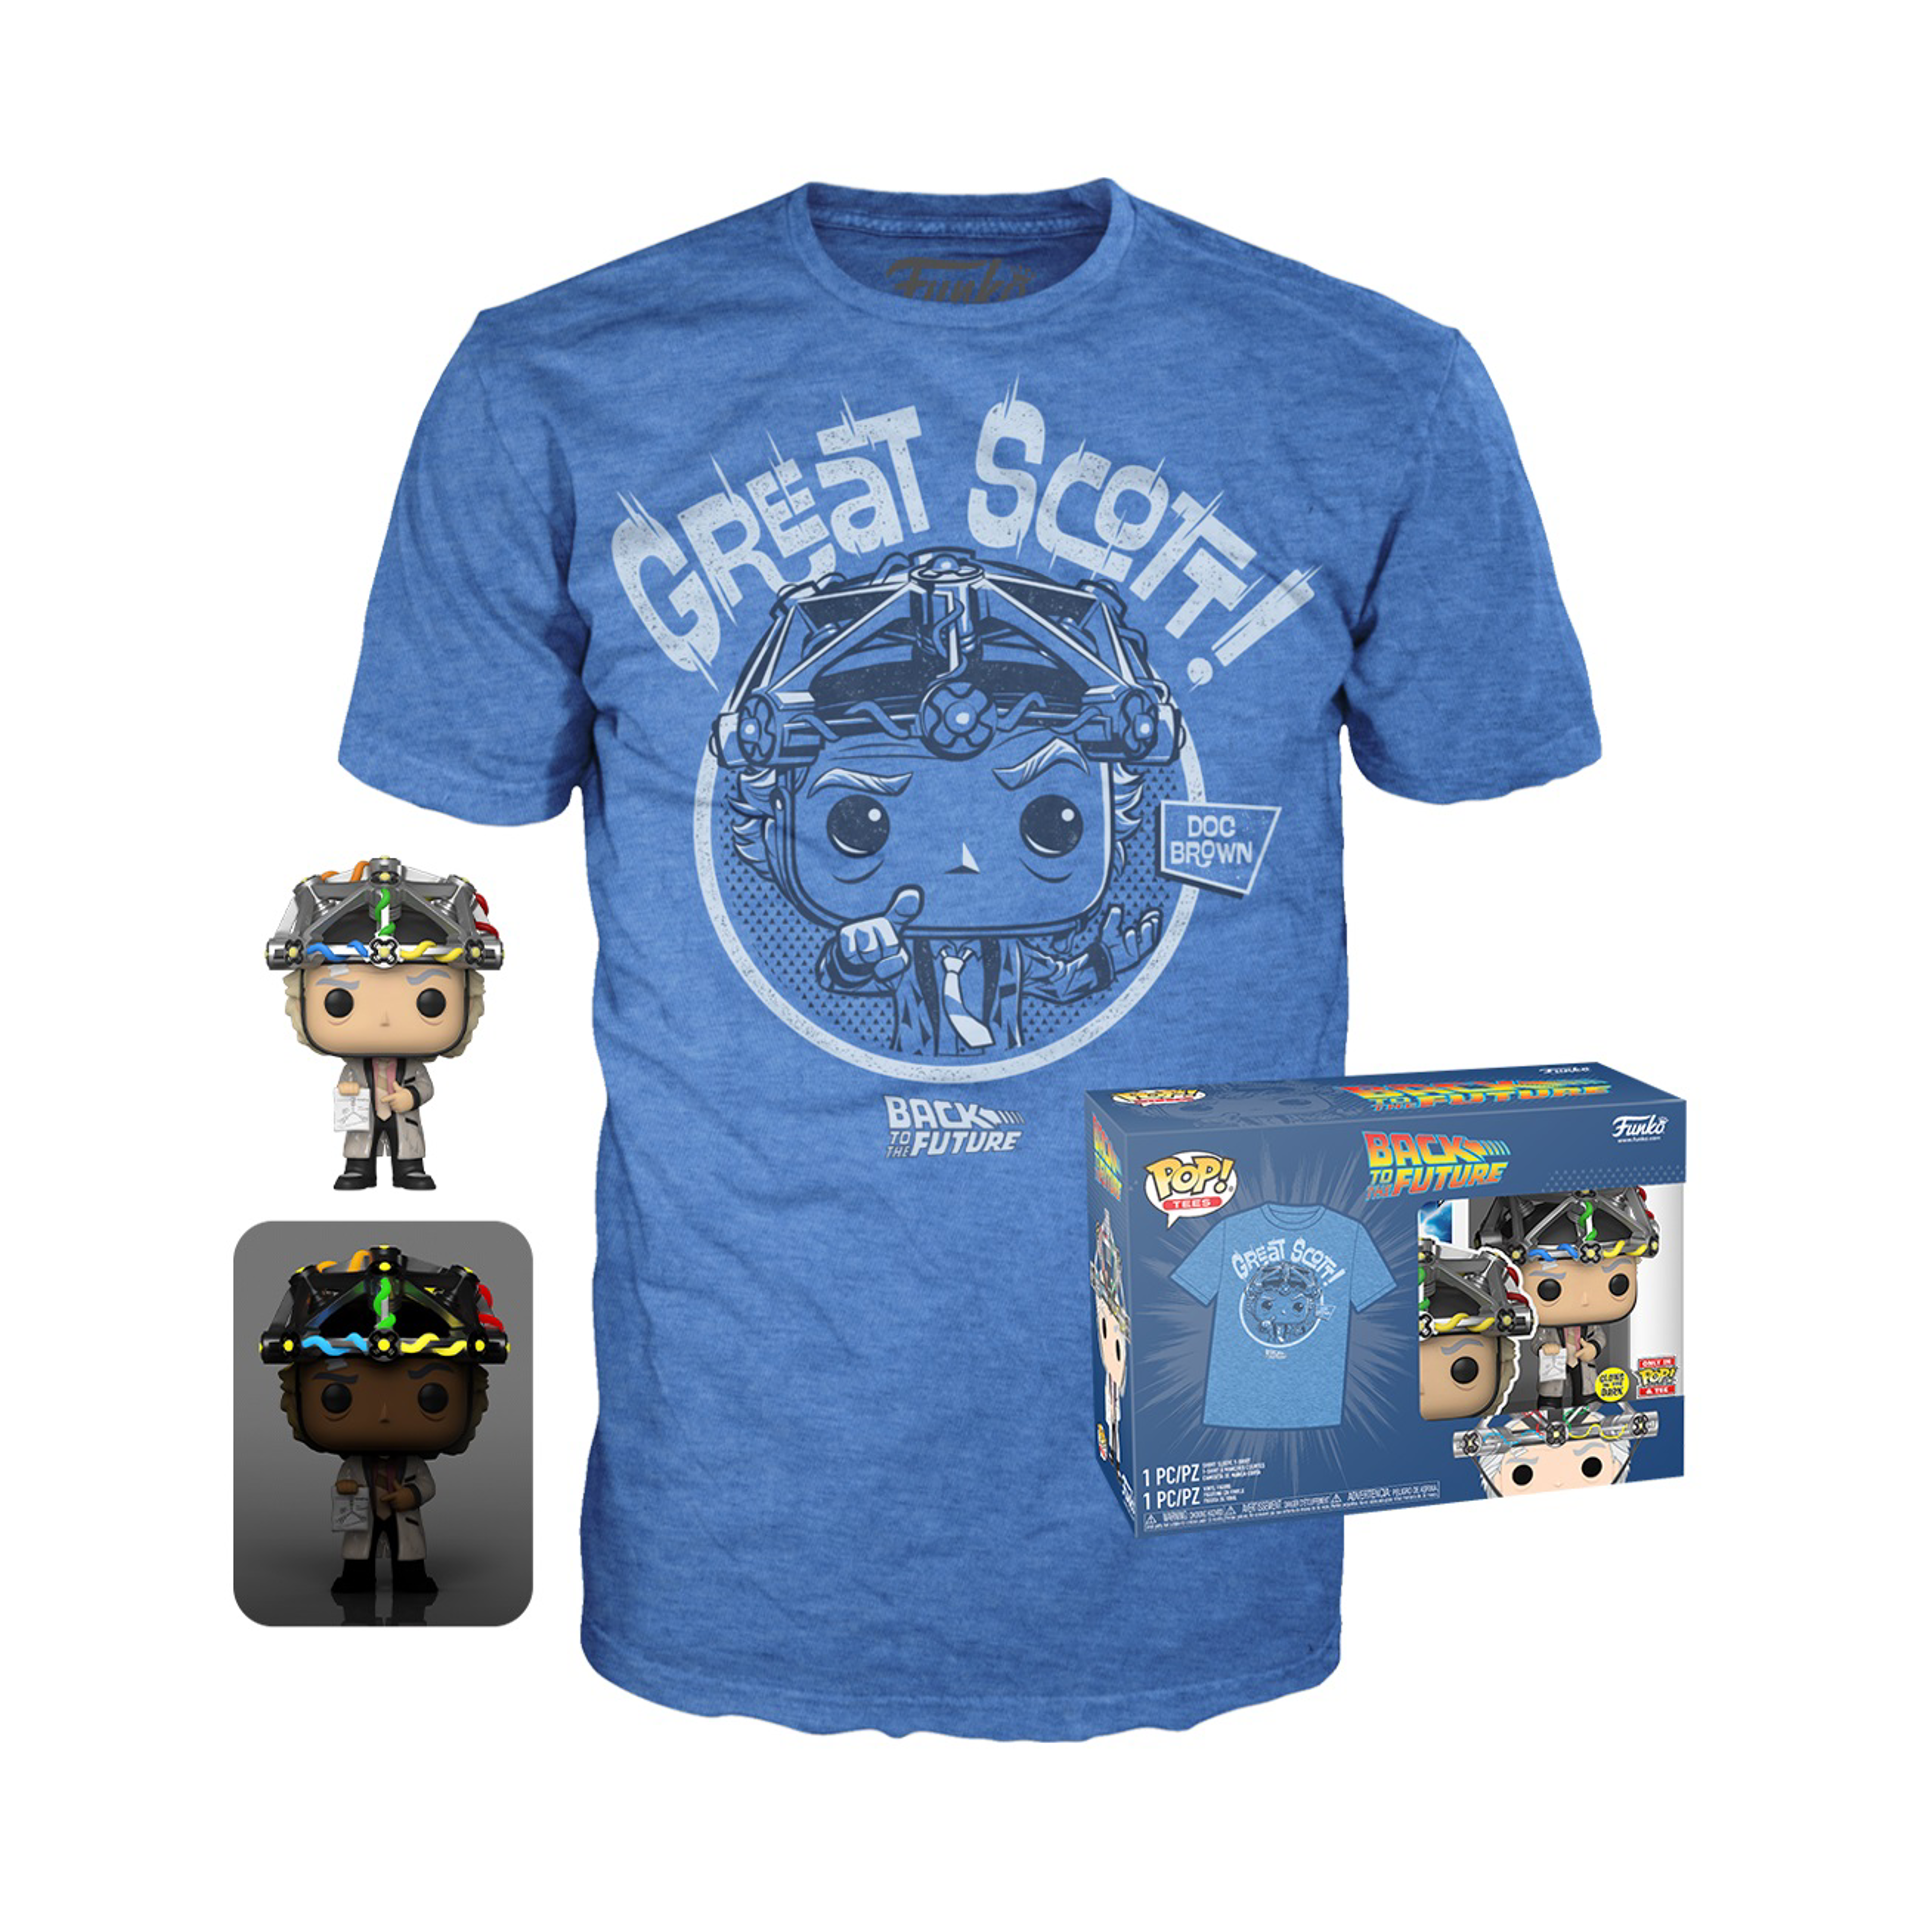 Acheter Funko Pop! & Tee:- XL -Back To The Future - Doc with Helmet - T- Shirt prix promo neuf et occasion pas cher